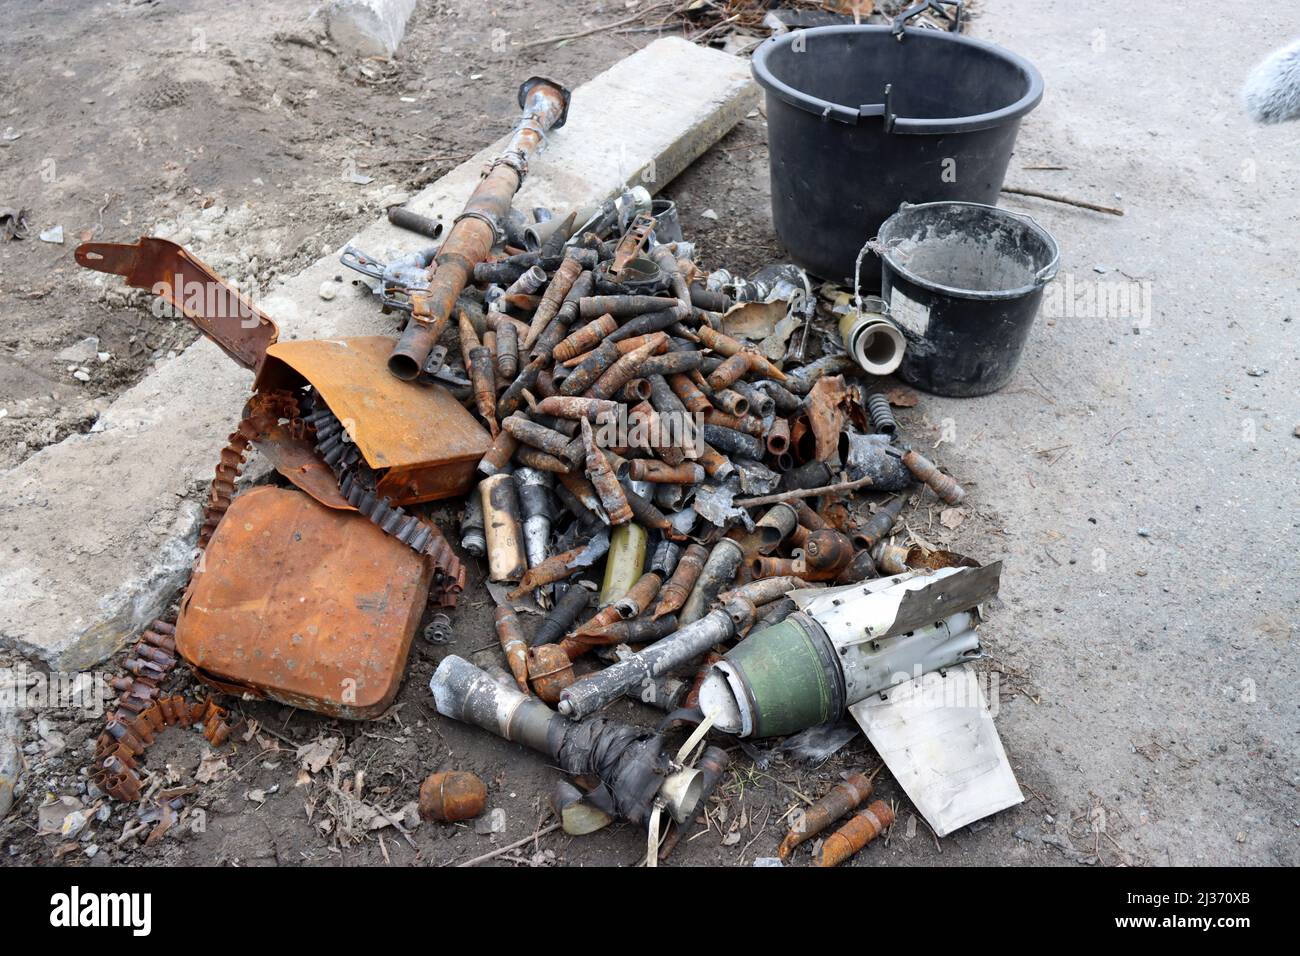 BUCHA, UKRAINE - APRIL 5, 2022 - Cartridge cases are pictured on Vokzalna Street following the liberation of the city from Russian invaders, Bucha, Ky Stock Photo